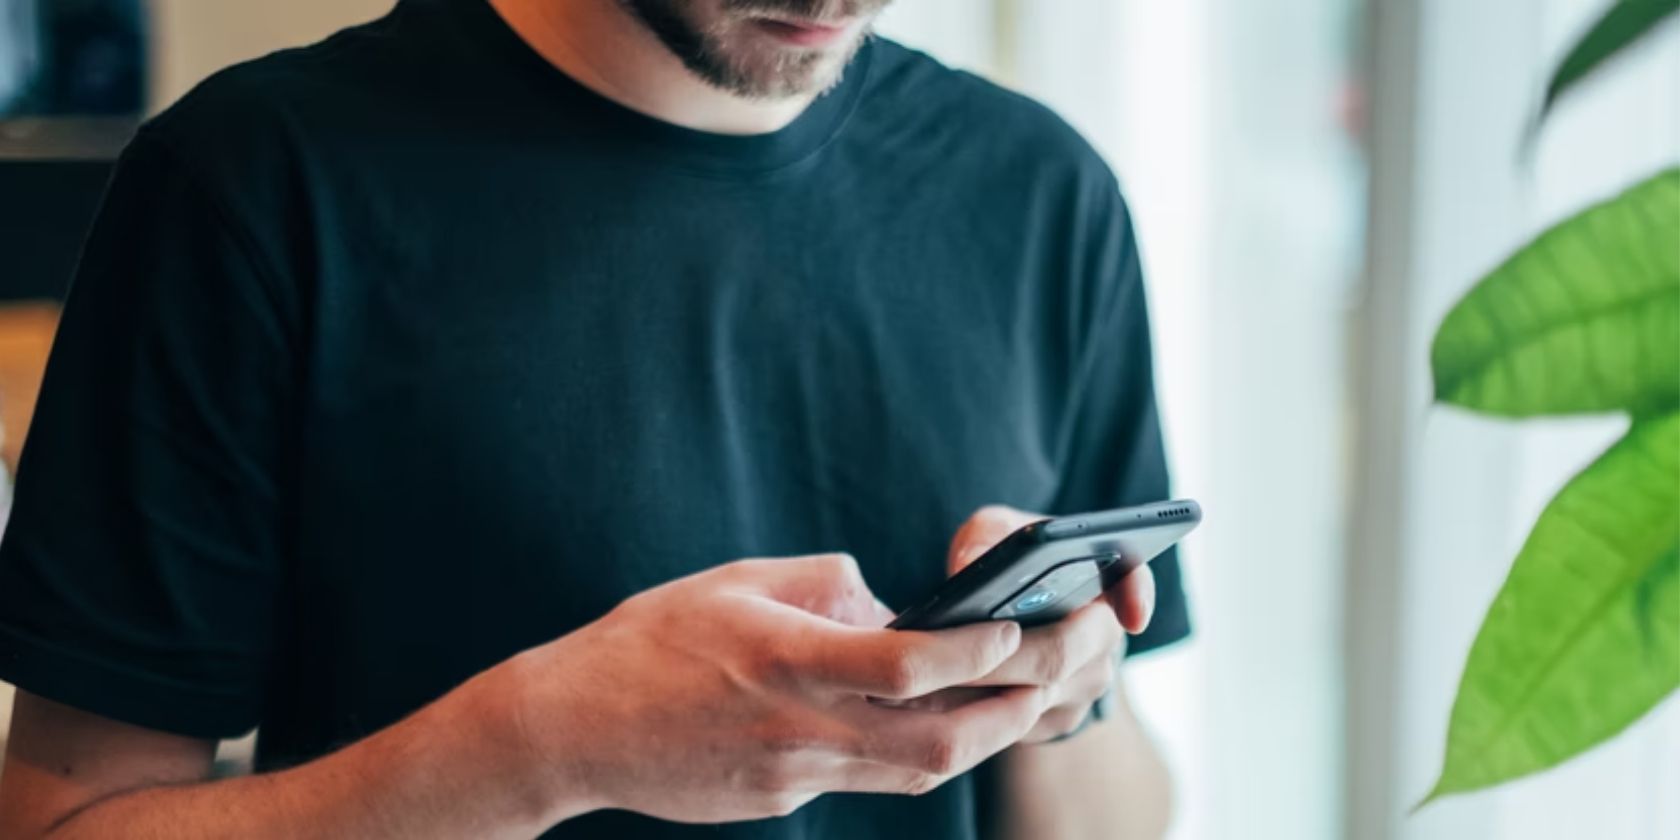 man holding and looking down at smartphone indoors